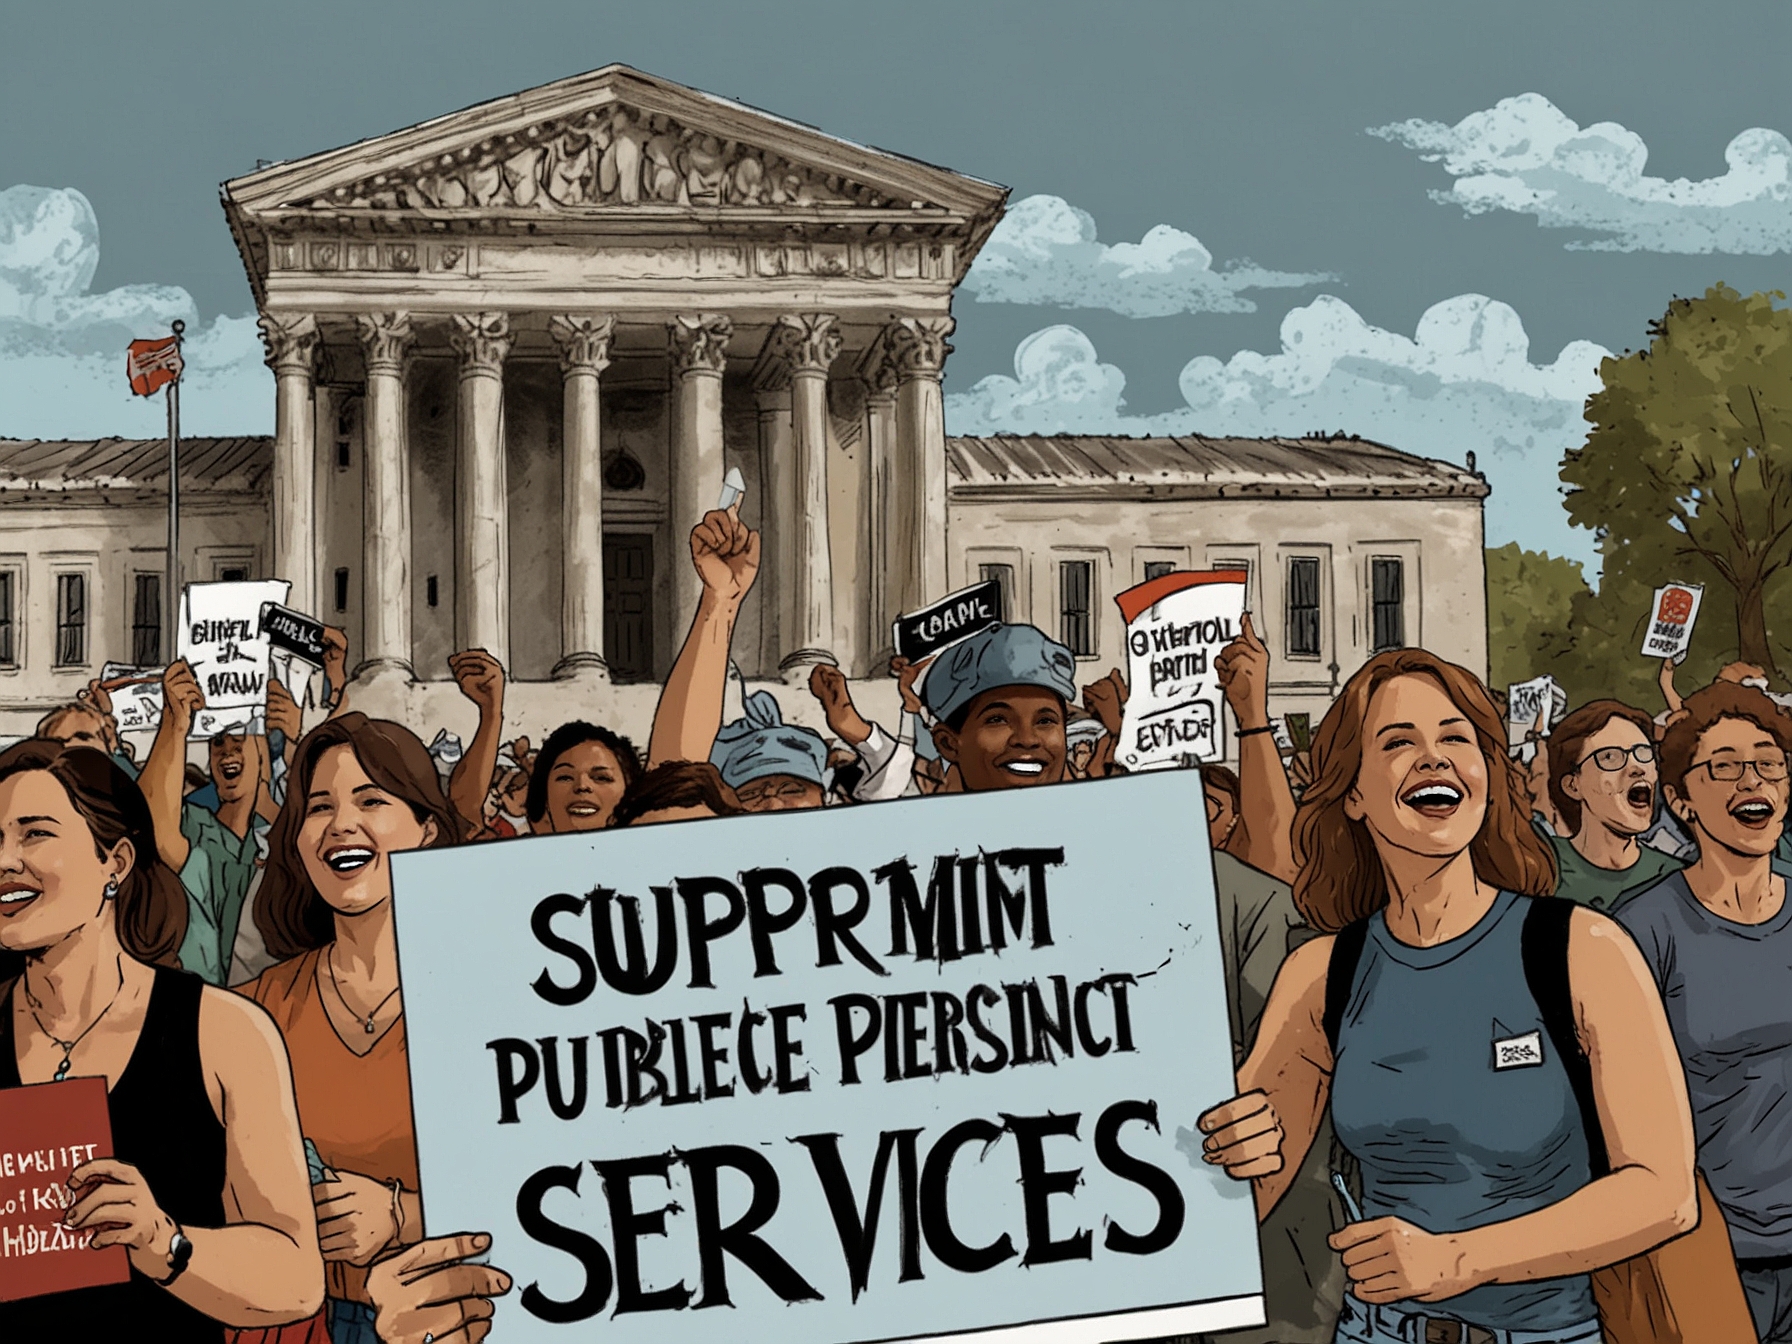 A jubilant crowd holding 'Support Public Services' signs in front of the Supreme Court, celebrating the decision to block the anti-tax measure that threatened California's fiscal policies.